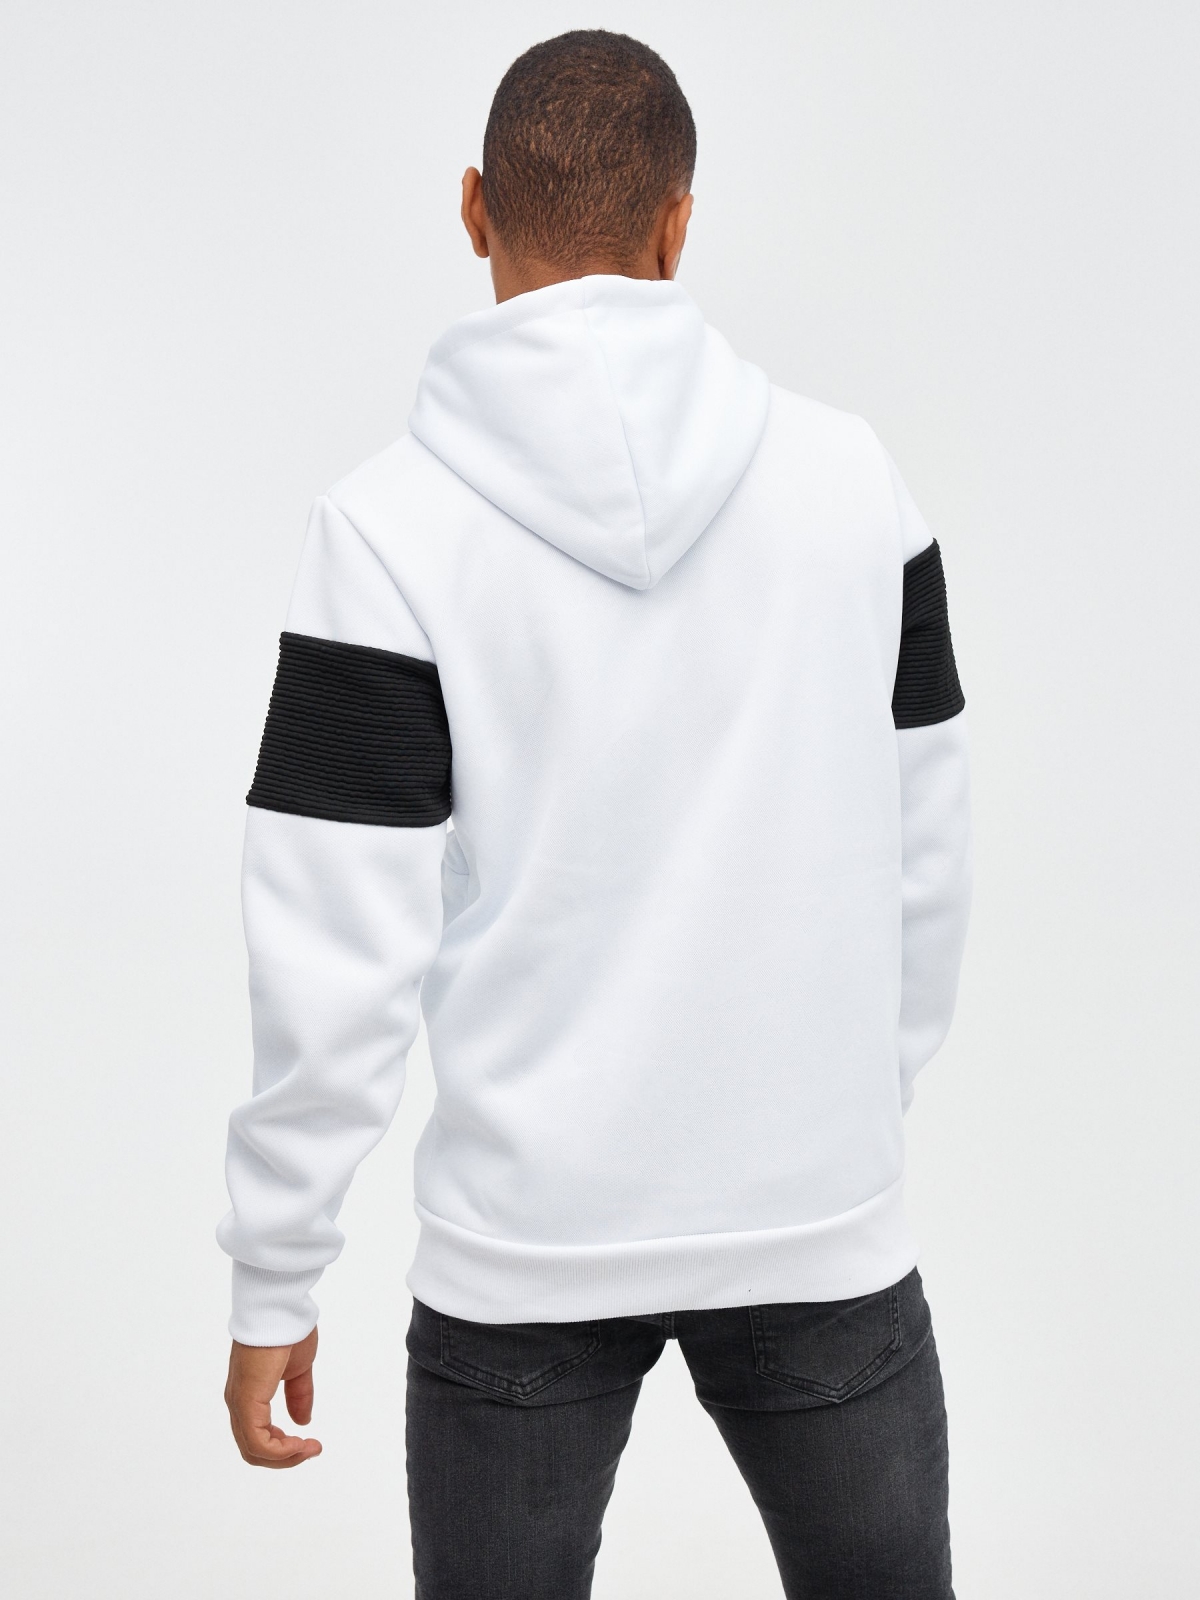 Camouflage zip-up sweatshirt white middle back view